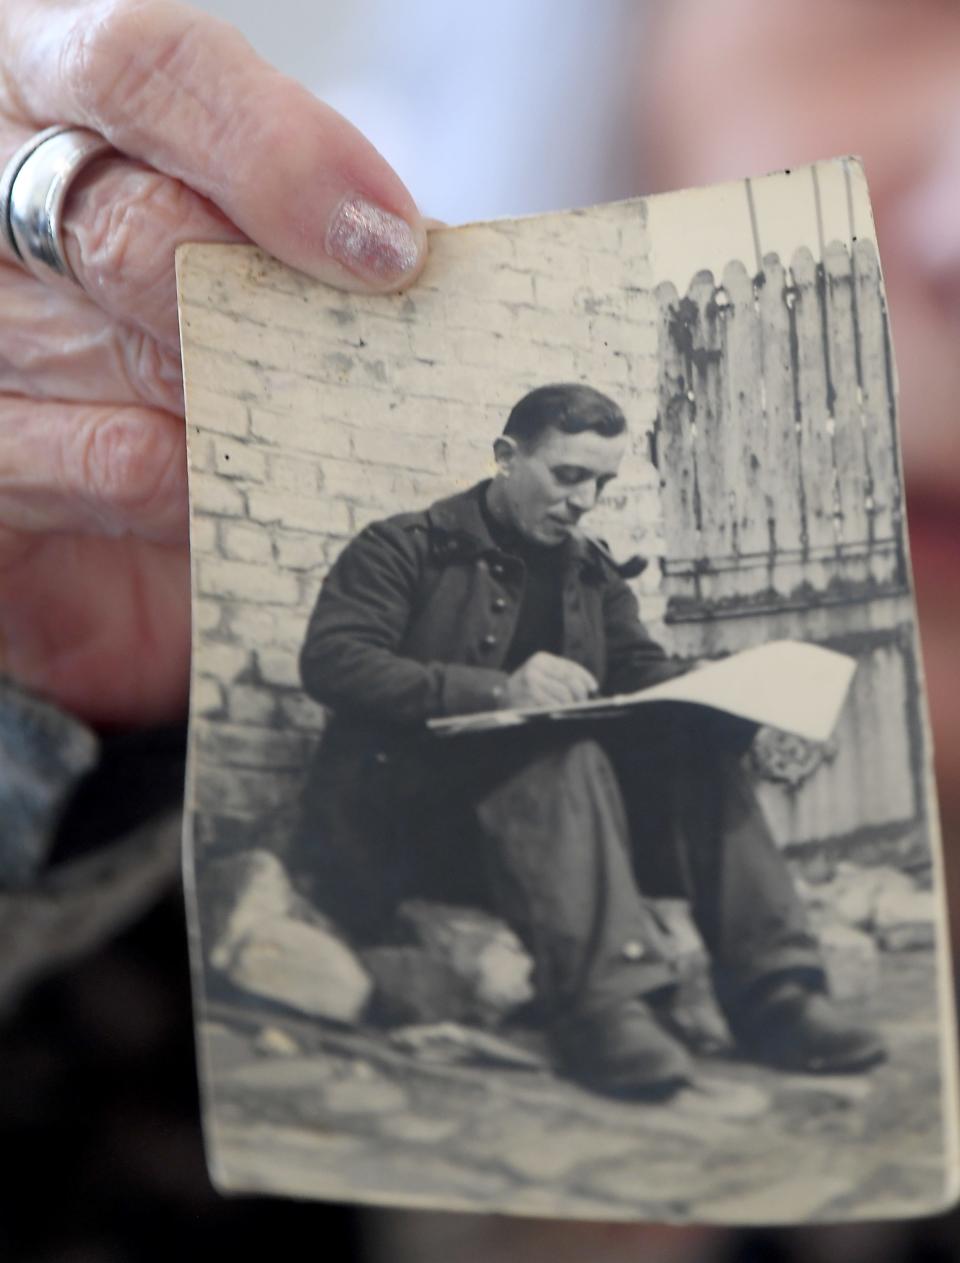 Photo of Daniele Greene's Uncle, Robert Moreau, who the Germans took as a Prisoner of War.